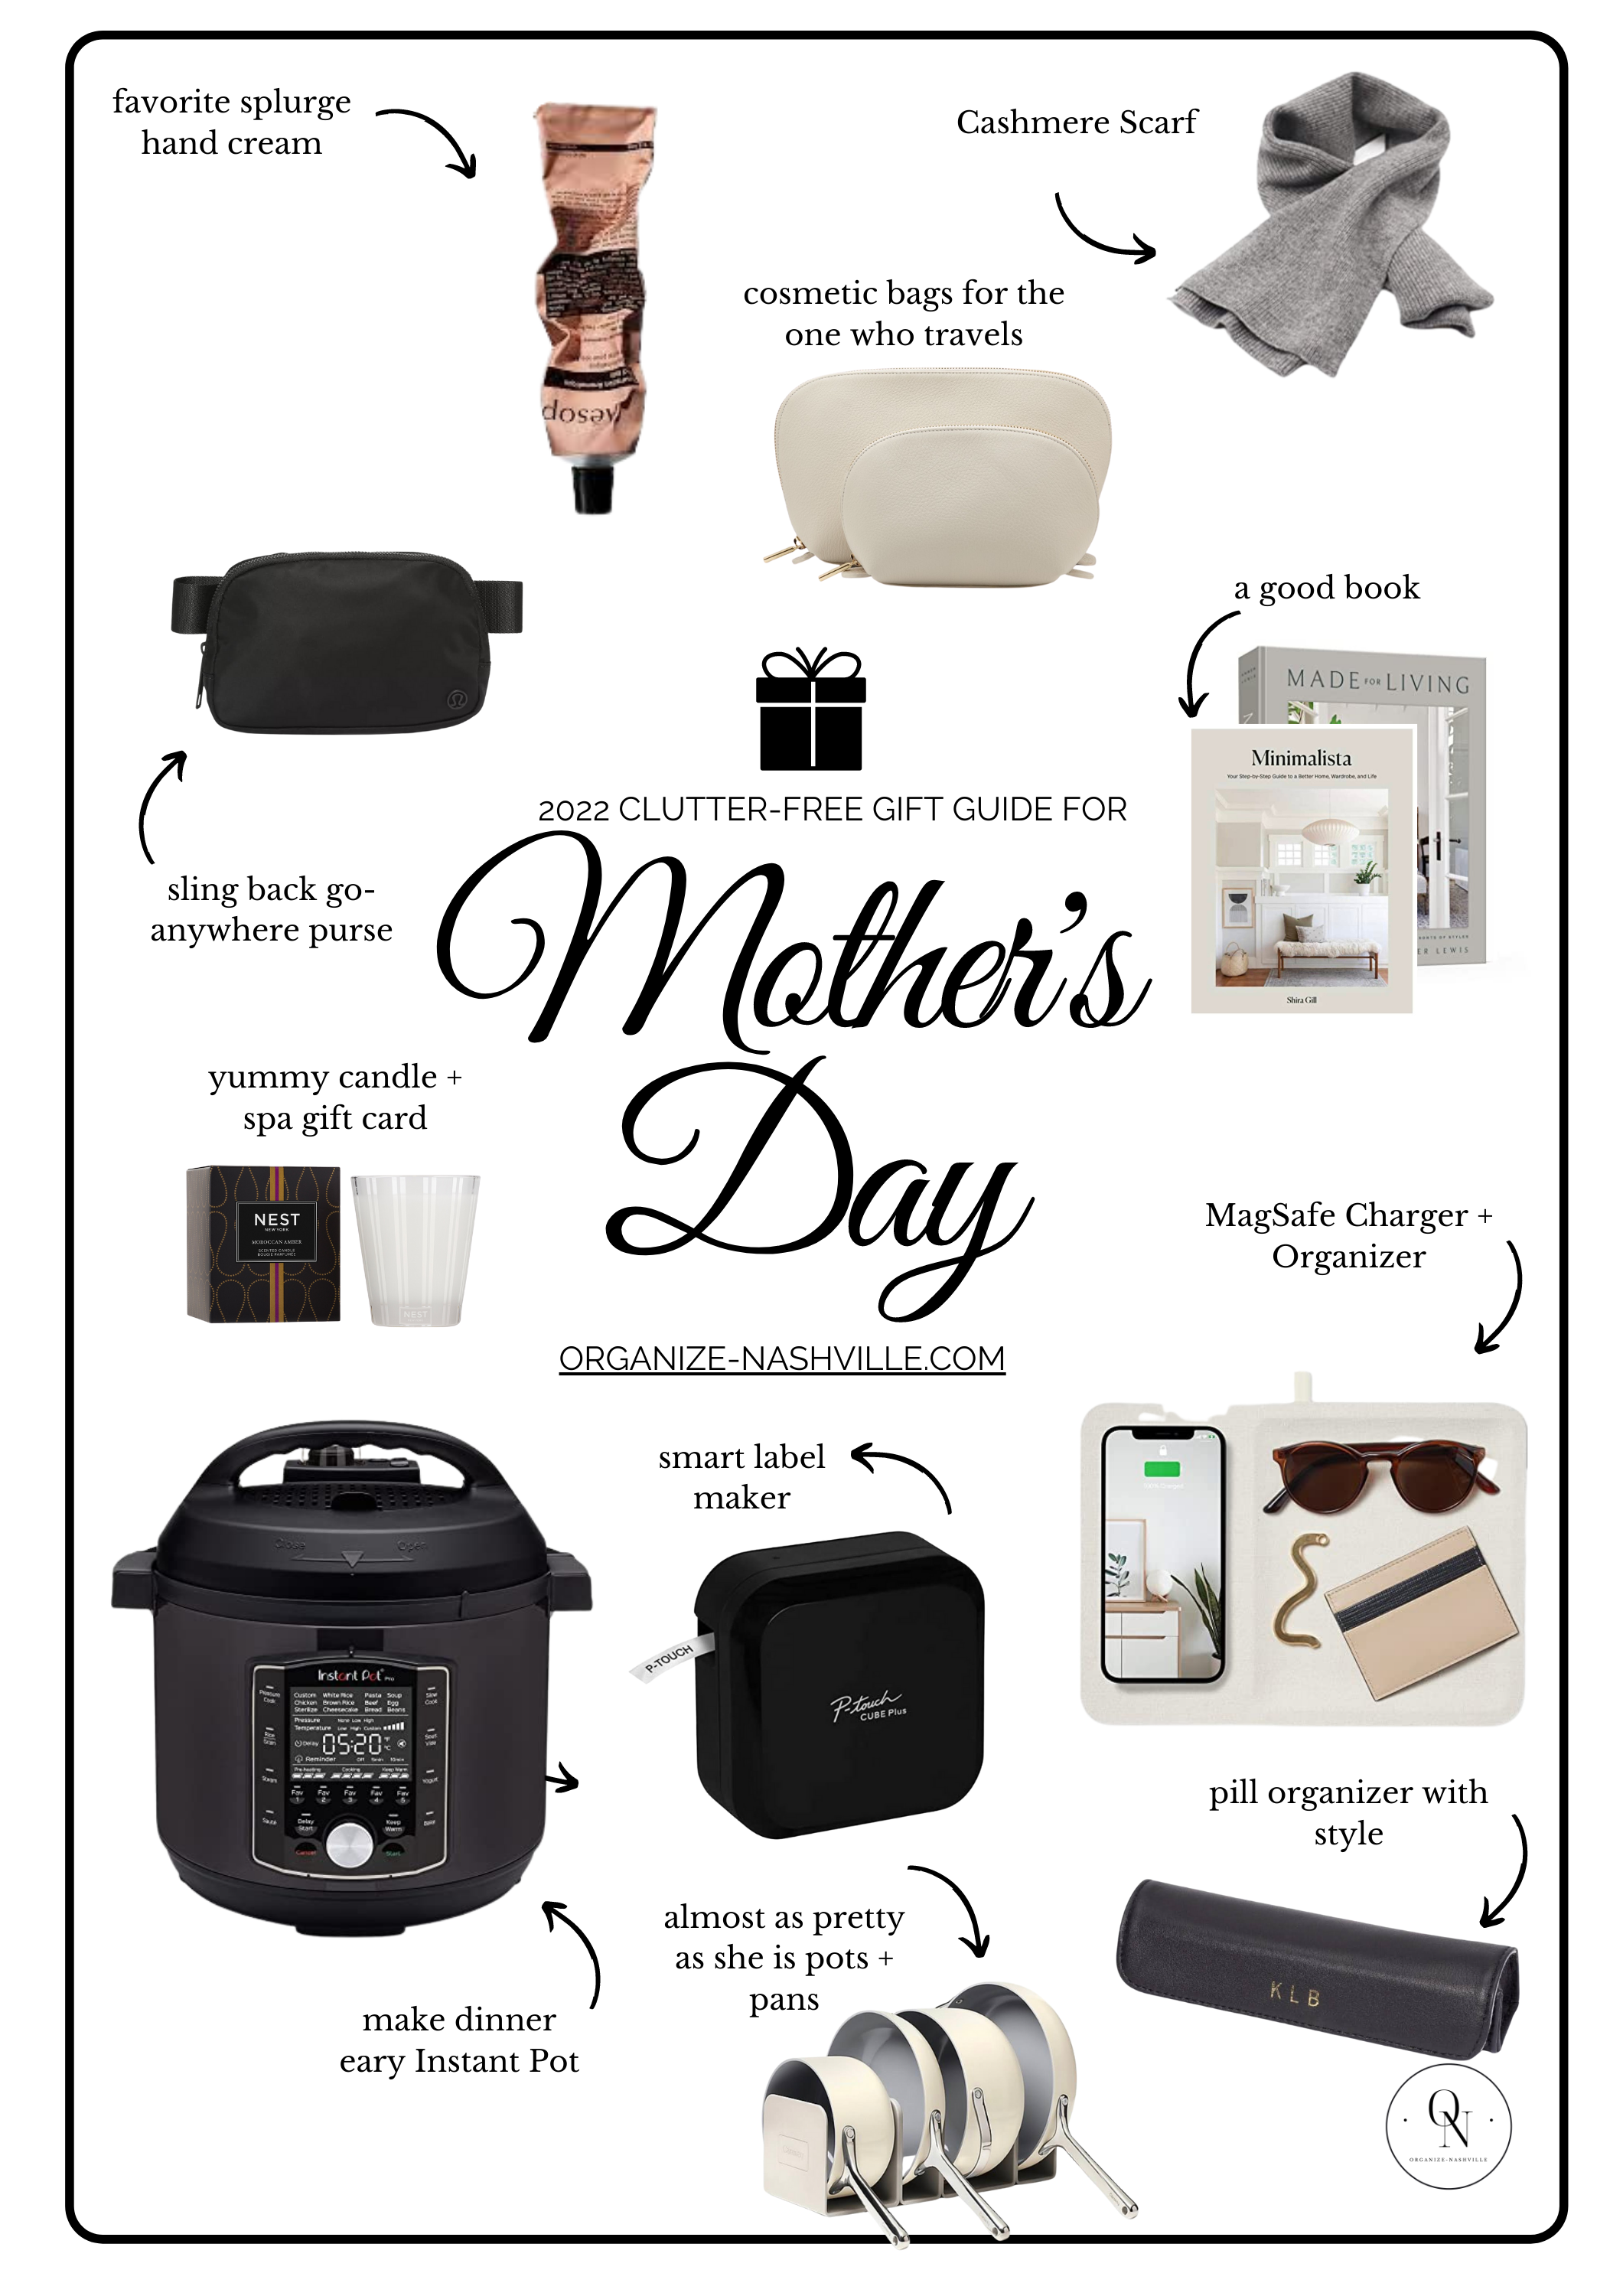 Mother's Day Gift Guide for Cooks